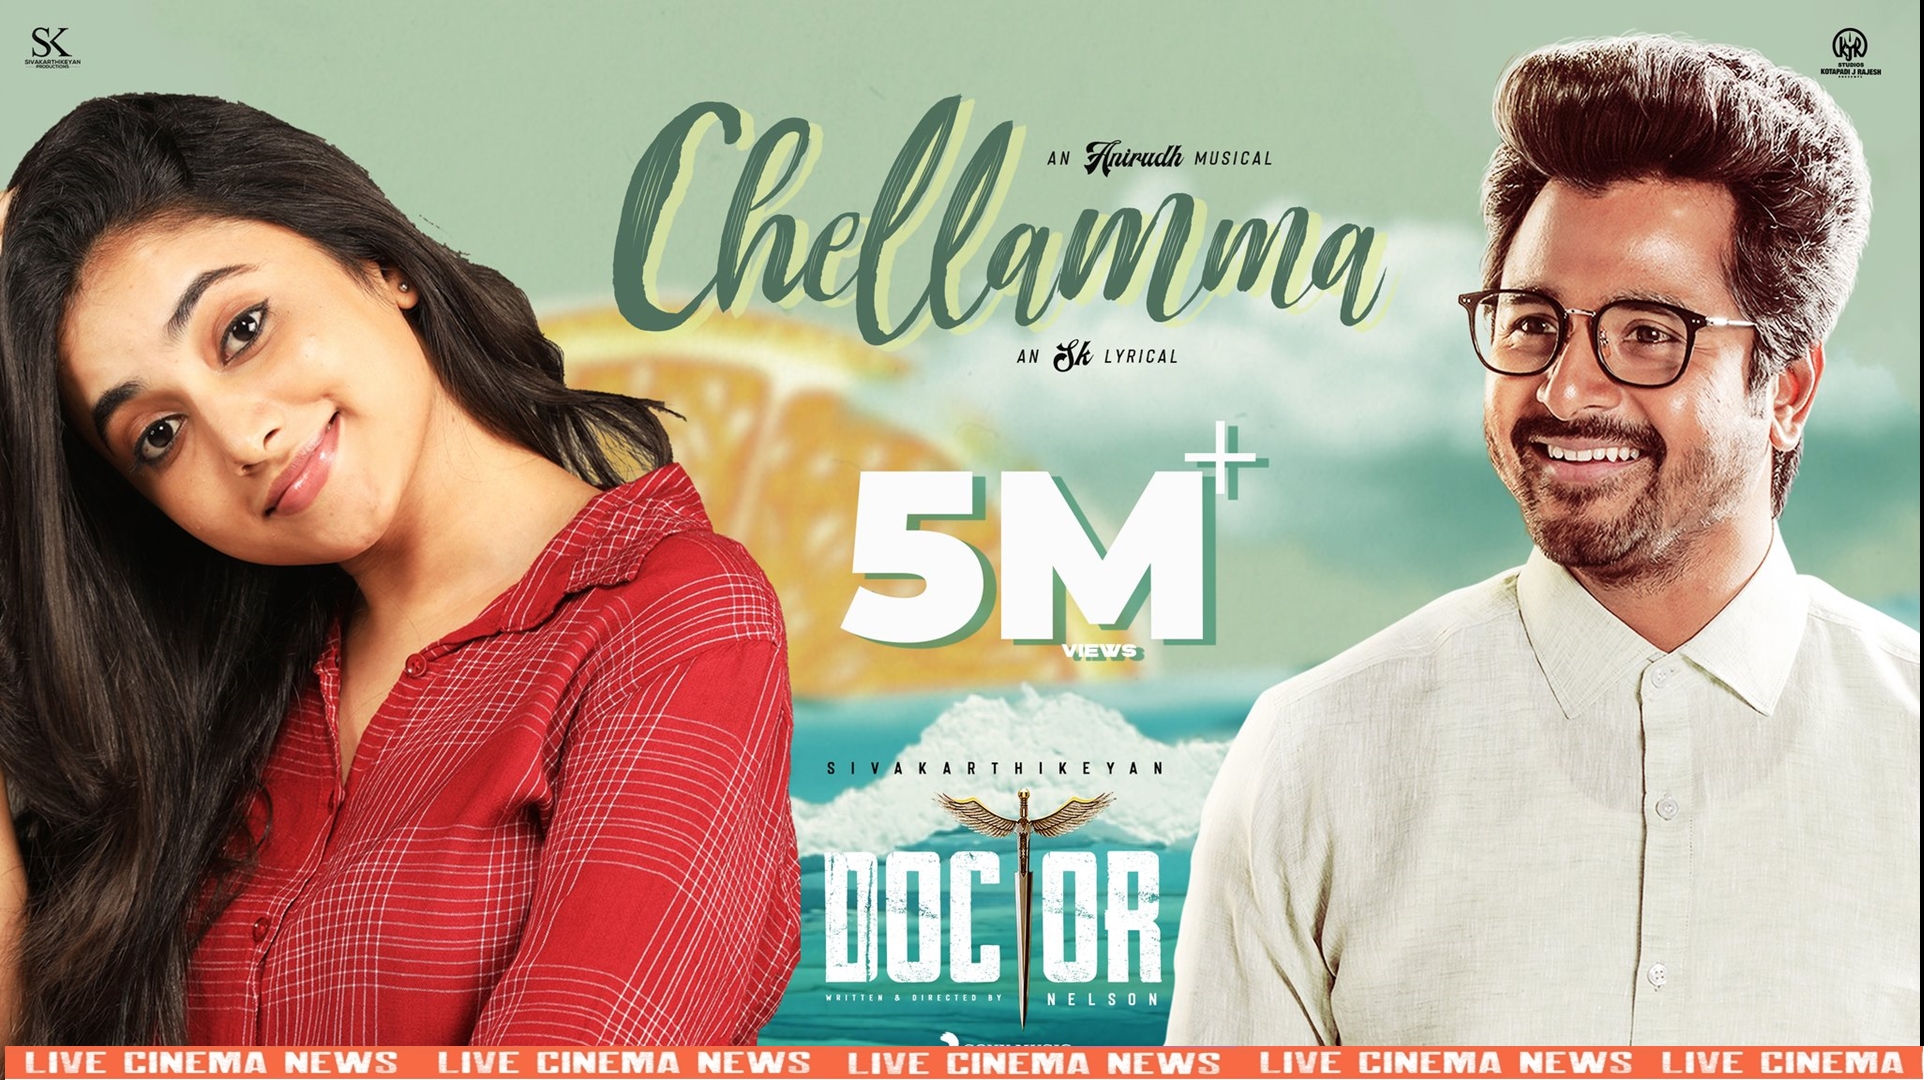 Chellamma song past 5 million viewers in youtube